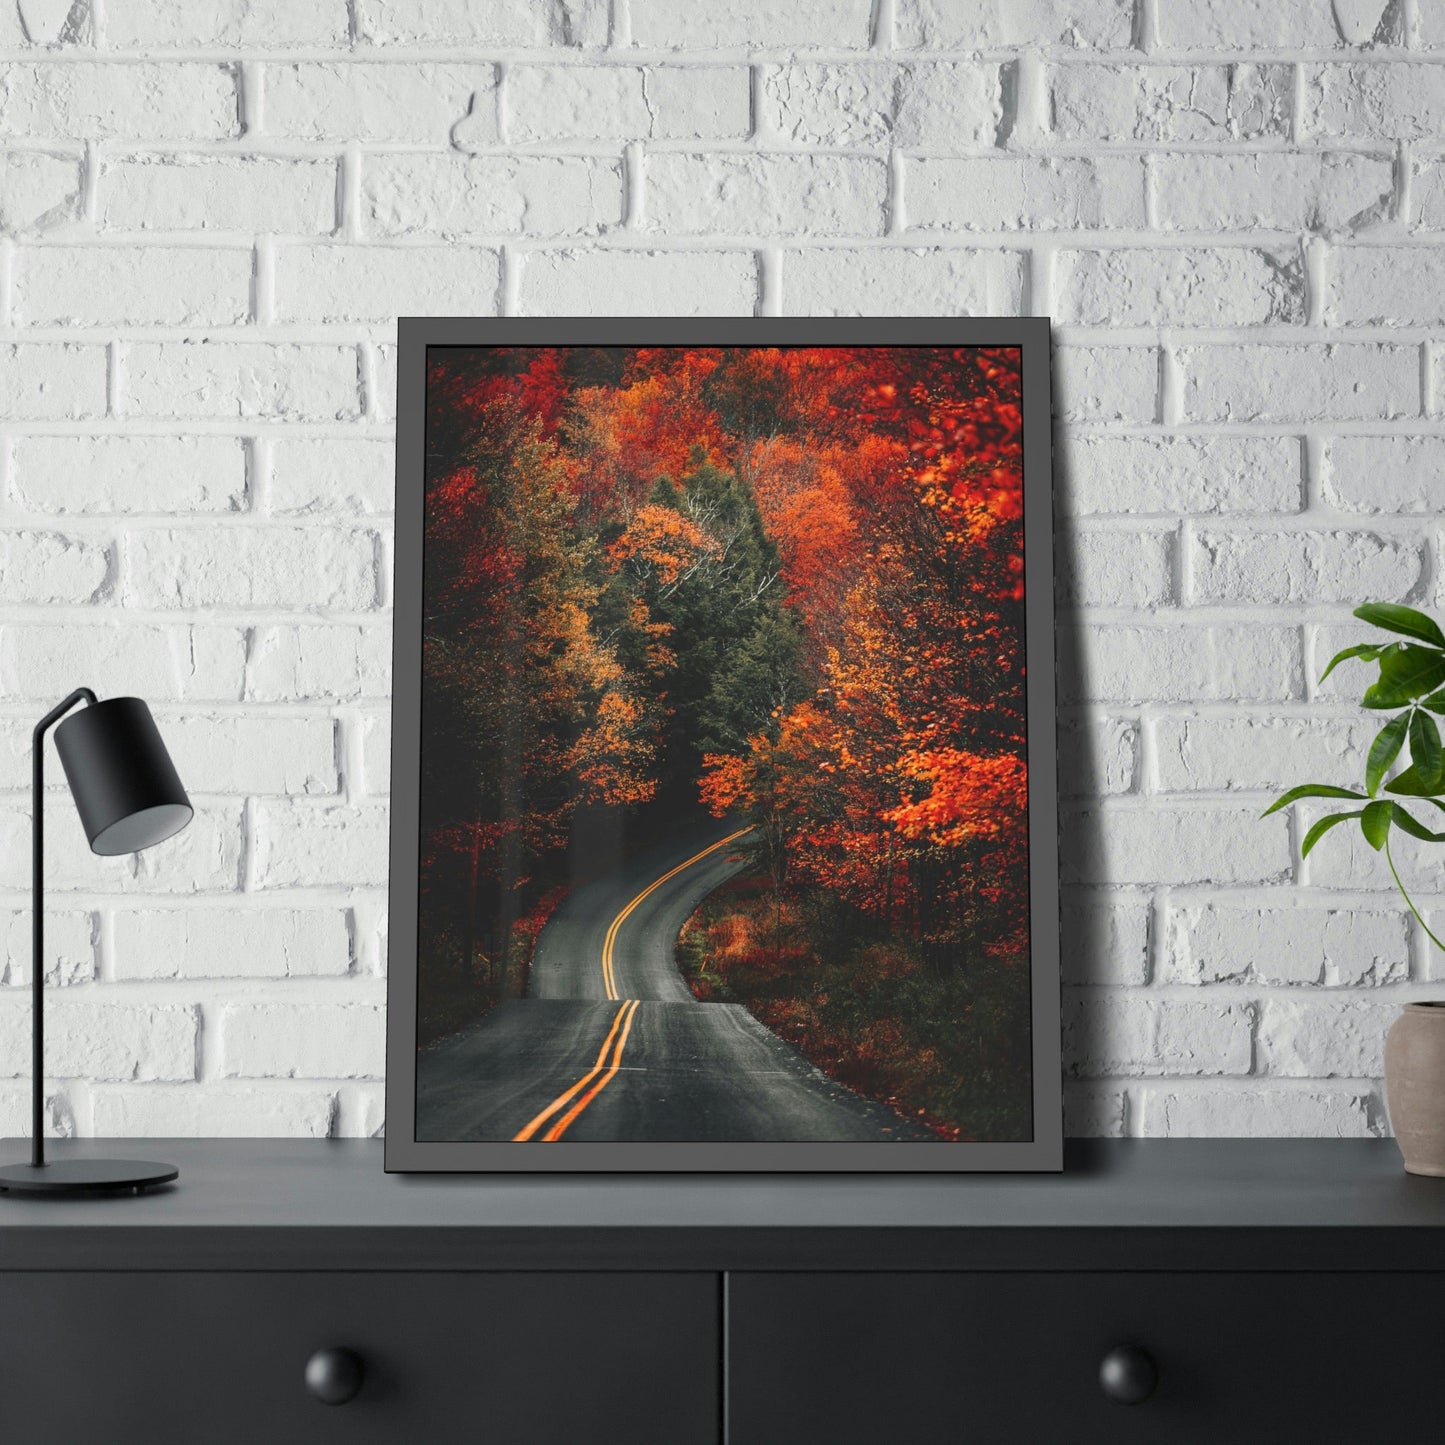 Golden Hues of Autumn: A Stunning Framed Poster and Wall Art to Bring Nature Indoors